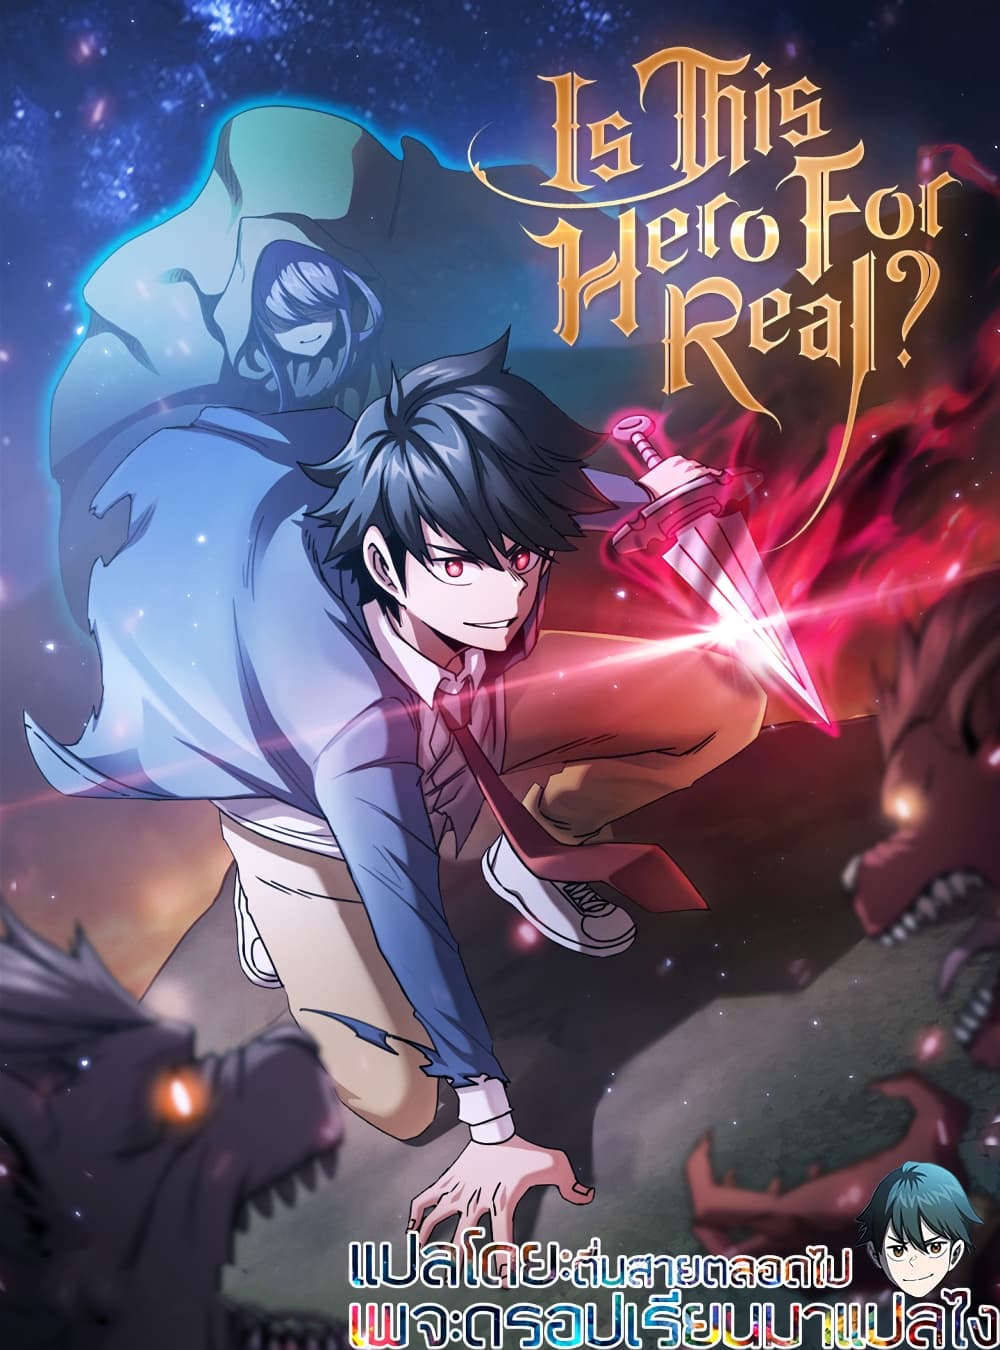 Is This Hero for Real à¸à¸­à¸à¸à¸µà¹ 33 (1)